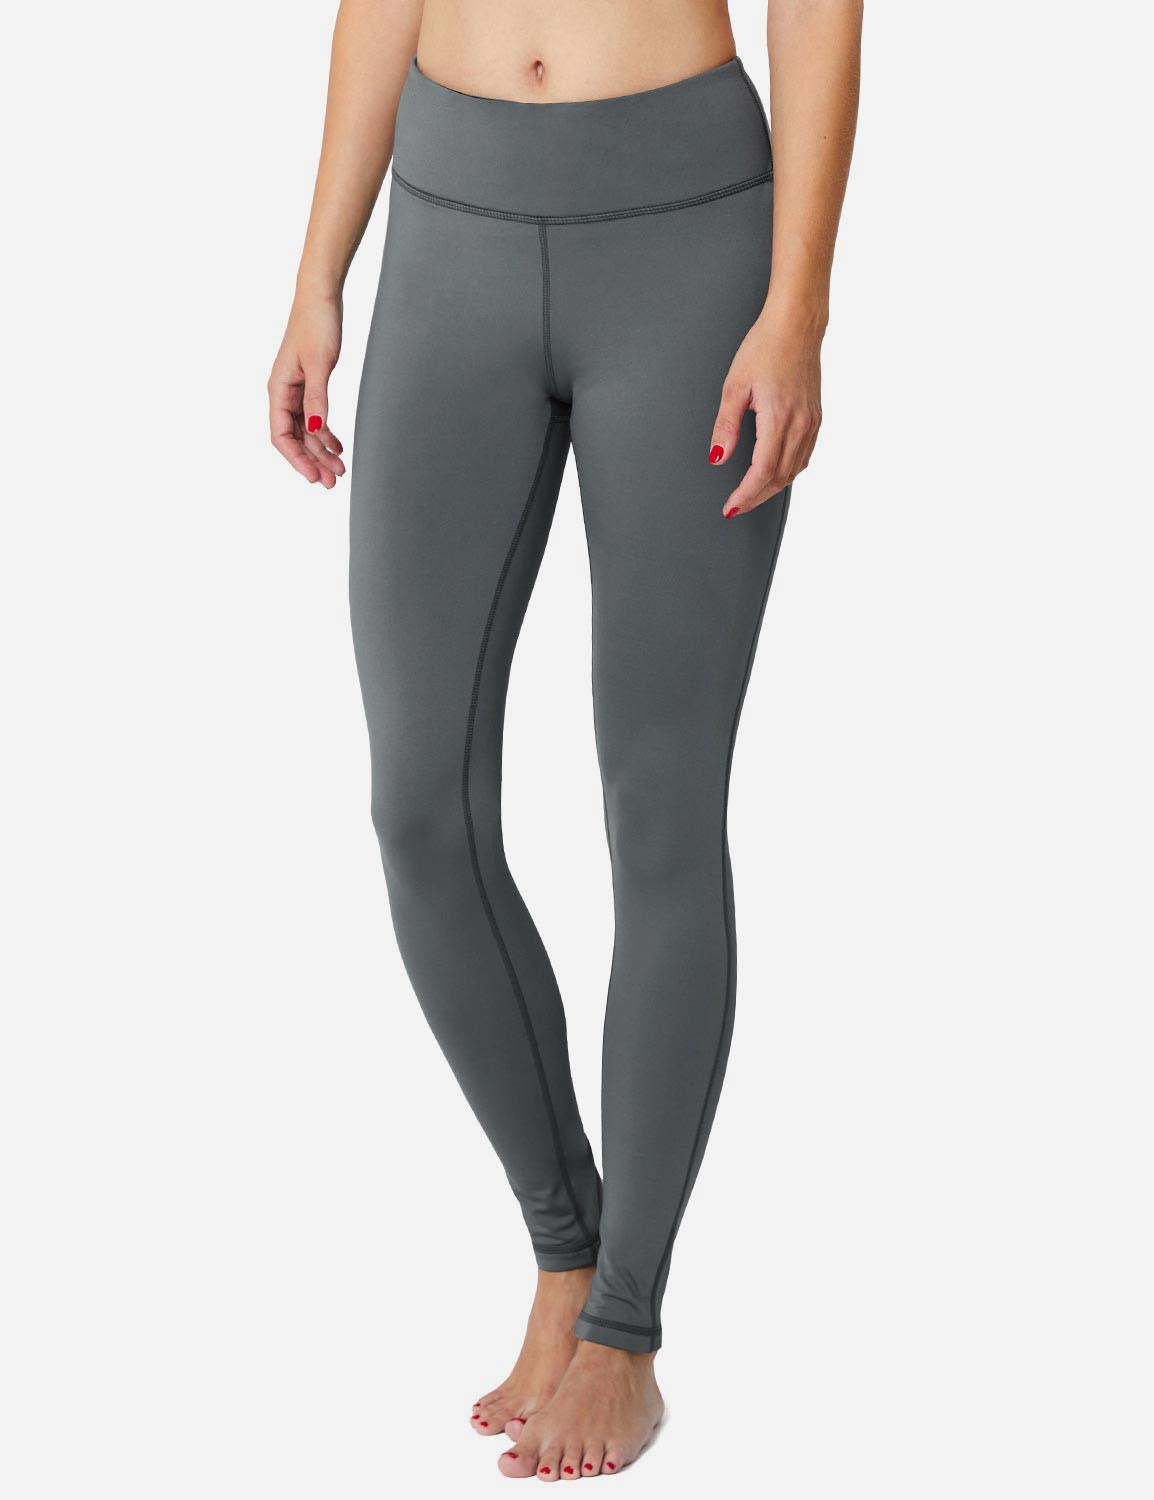 These Fleece-Lined Leggings From Amazon Are Perfect for Winter